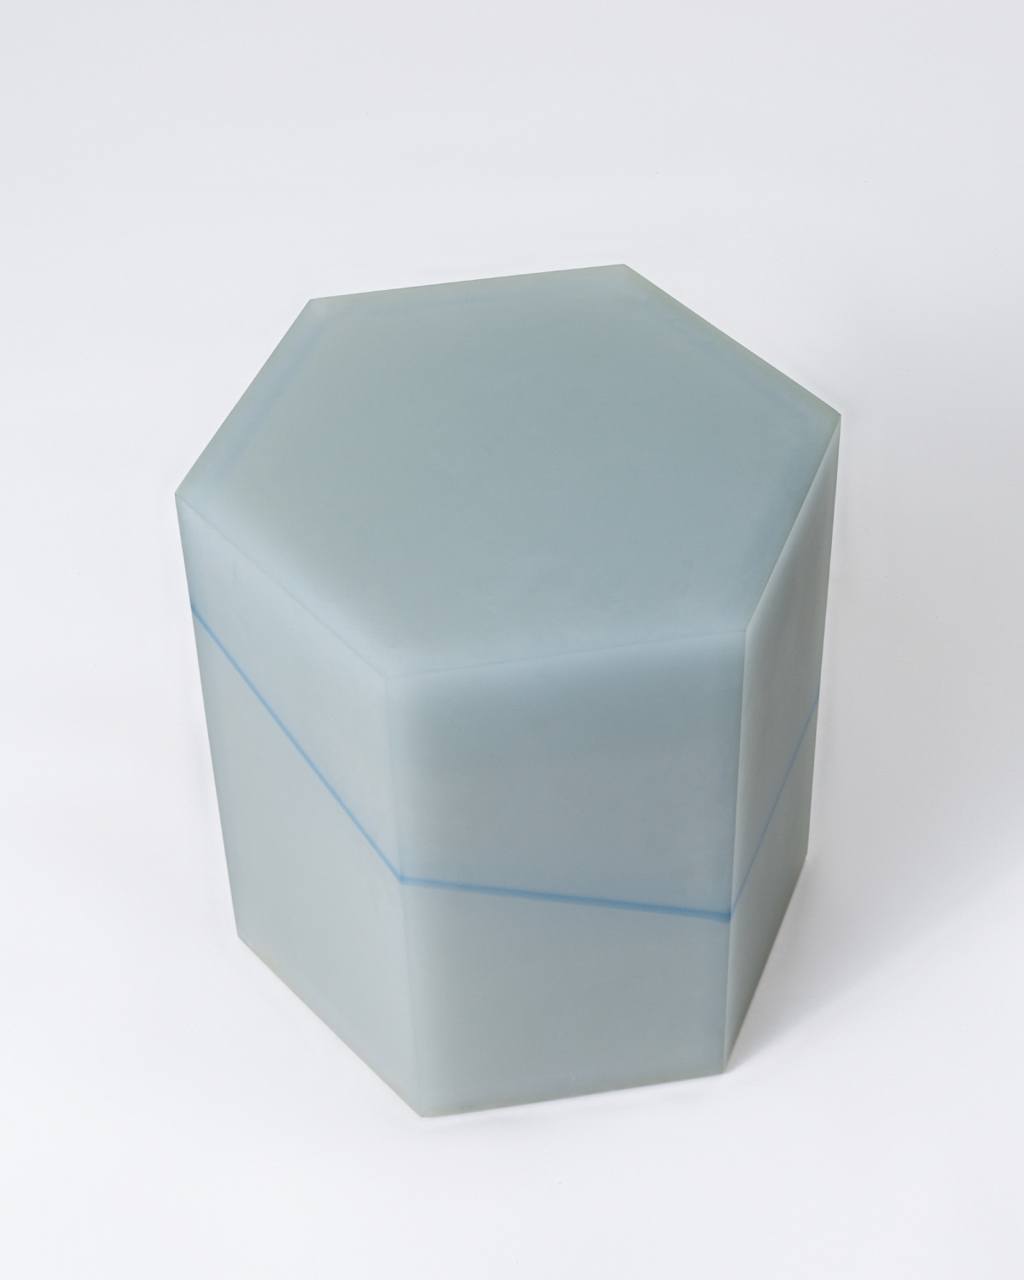 Striped Hex Side Table facturestudio 